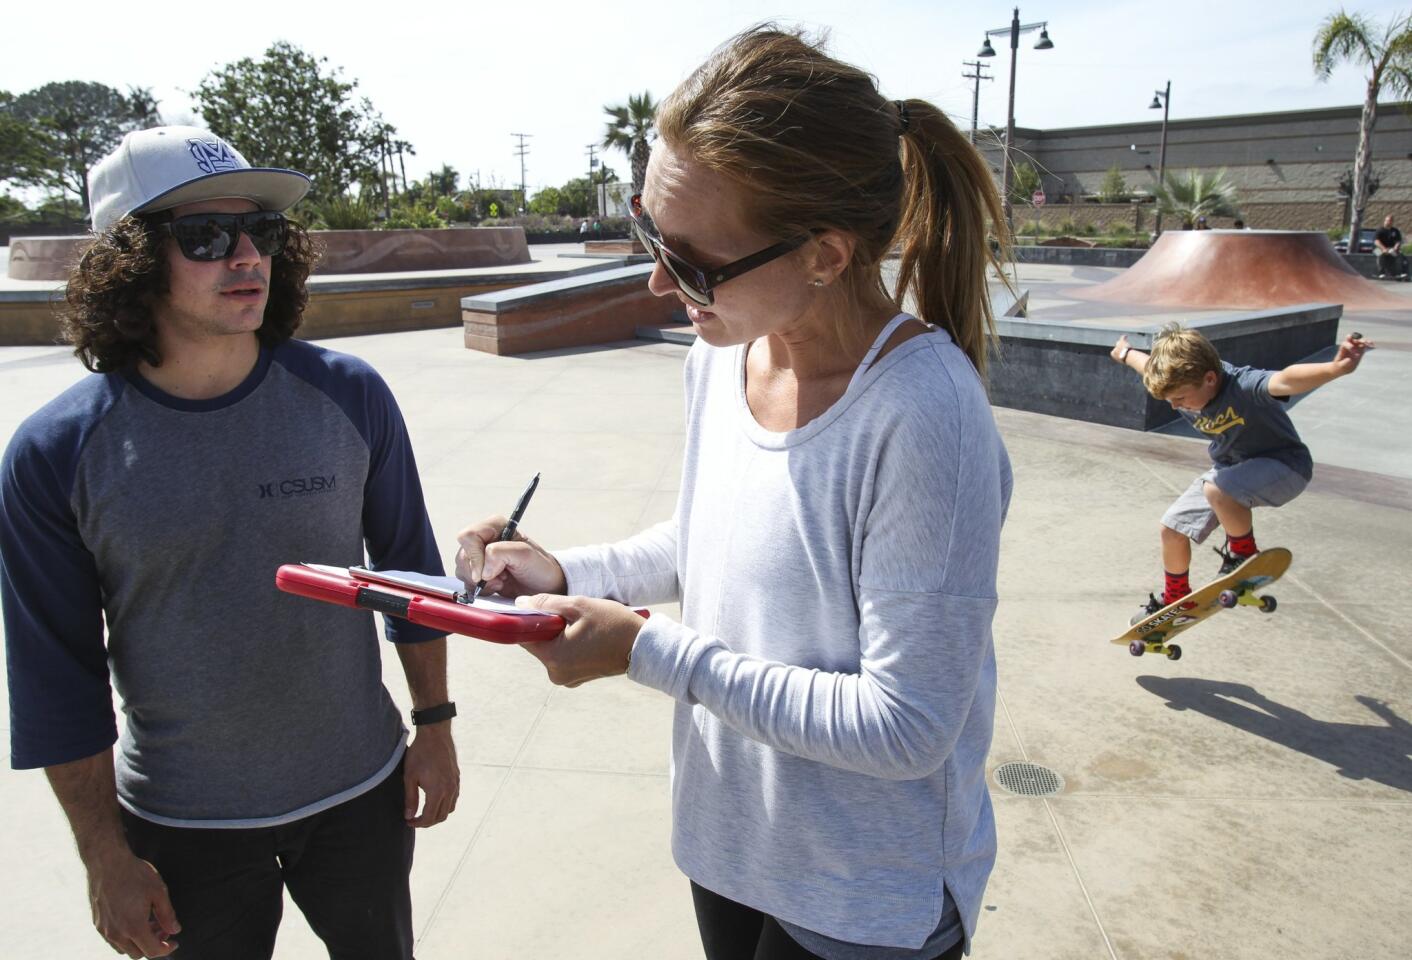 Alexandra Scully signs the paperwork for kinesiology intern Moses Wosk, 24, so that her son Ryan Scully, 8, right, can participate in CSUSM Kinesiology Department's skateboarder study.